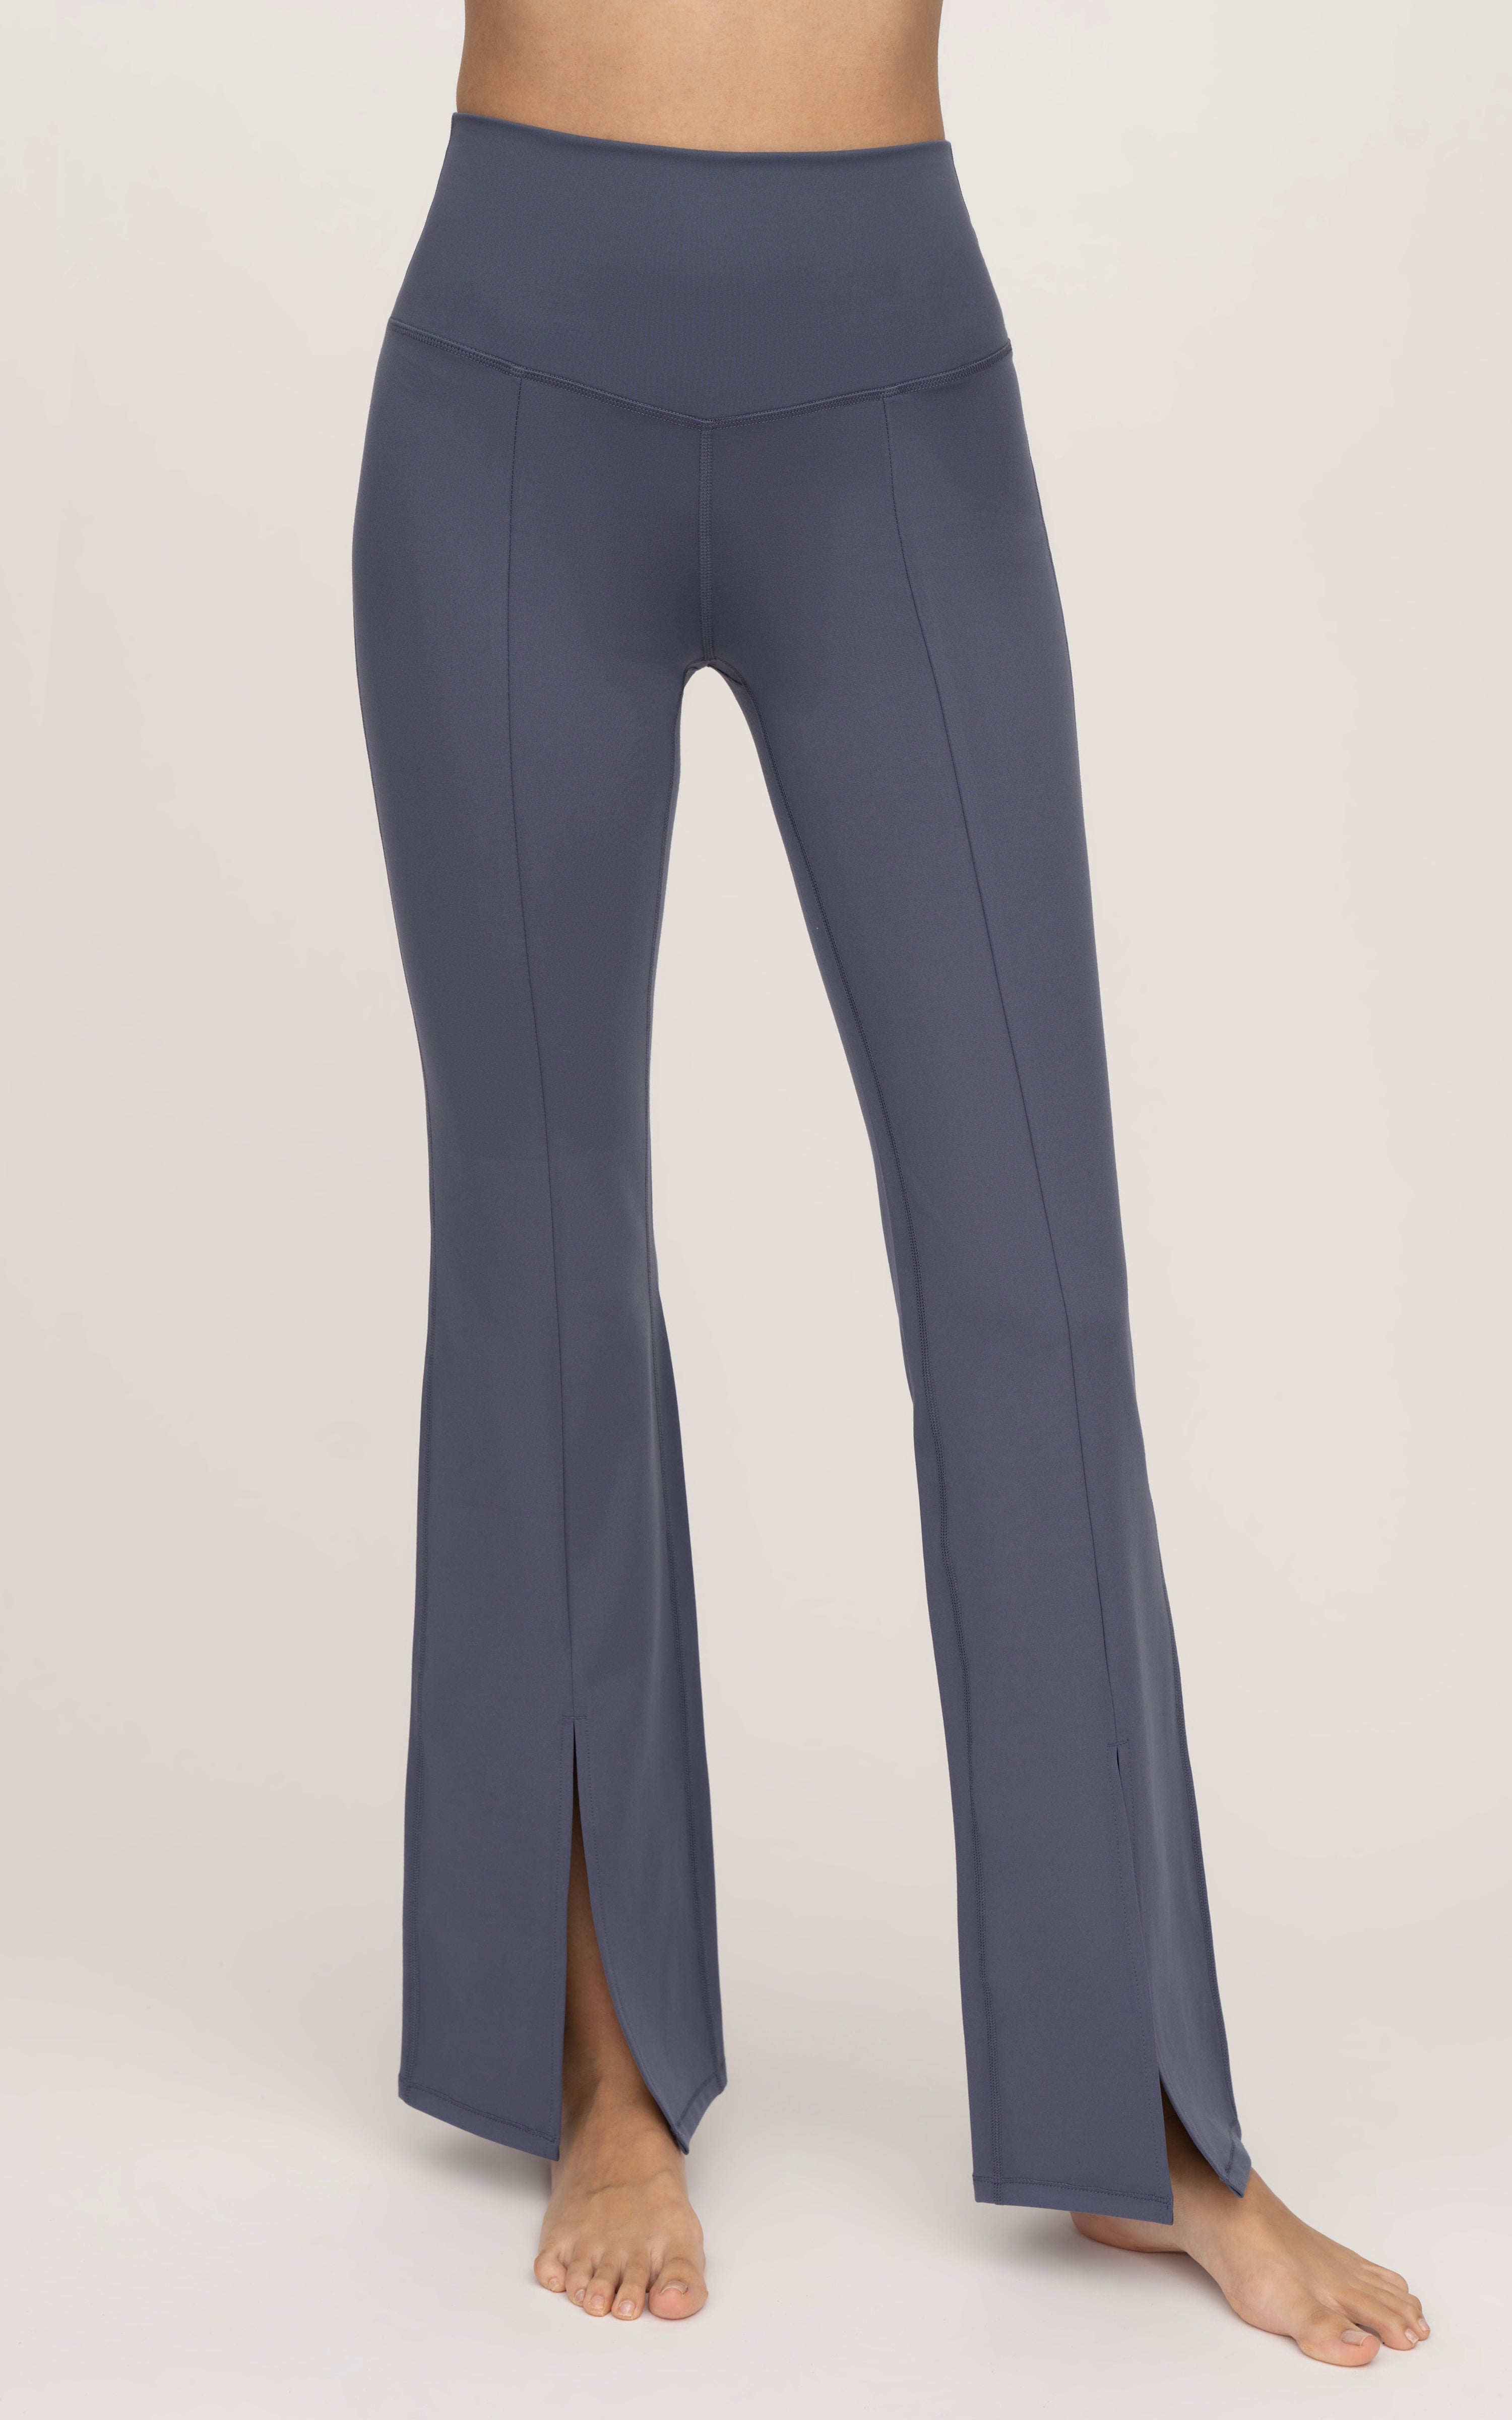 Brunita Pants - Mid Waisted Relaxed Elastic Waist Pants in Tile